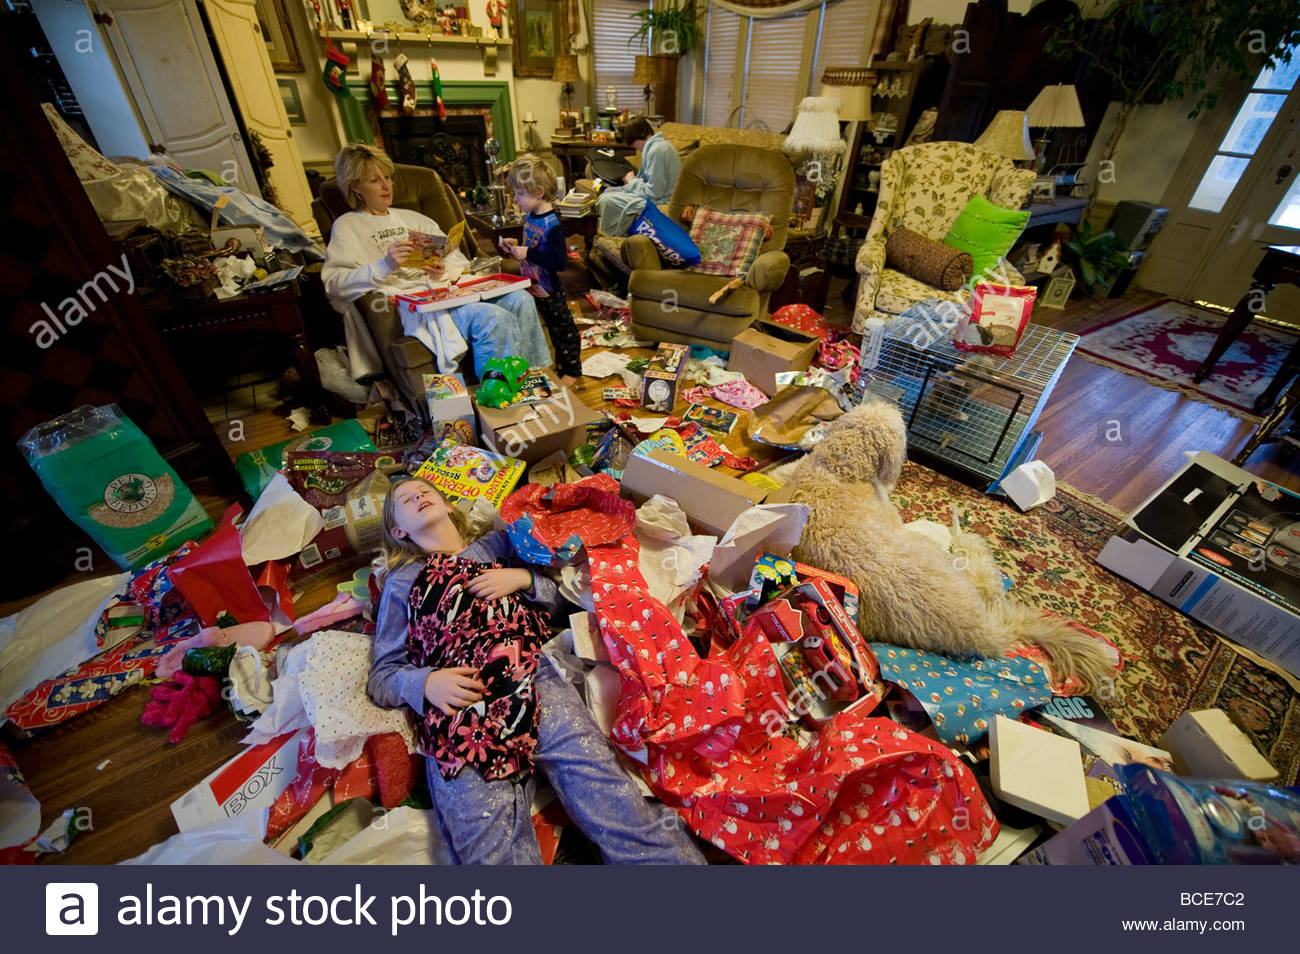 christmas-morning-after-all-the-presents-had-been-opened-BCE7C2.jpg